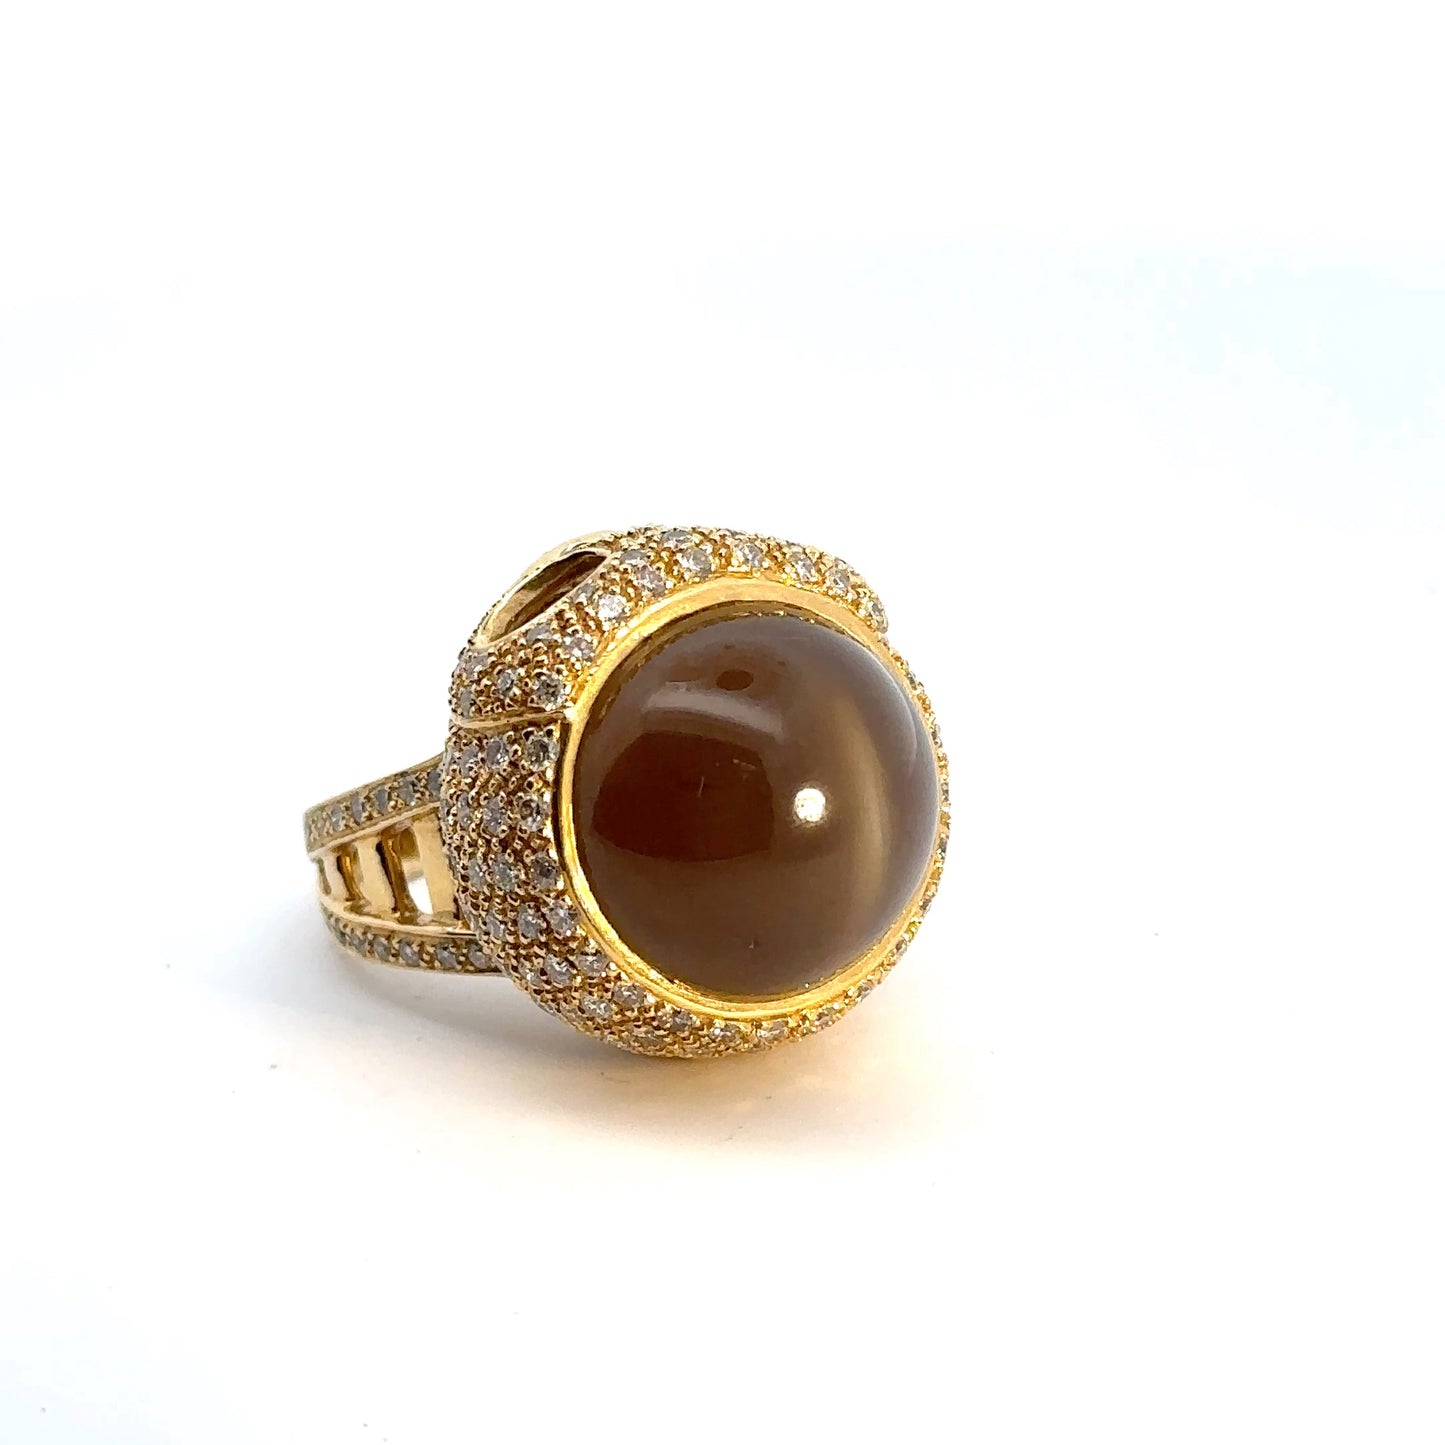 The cat's eye effect on the top of the brown stone. This gemstone has a white line across the top when a light is shown on it.